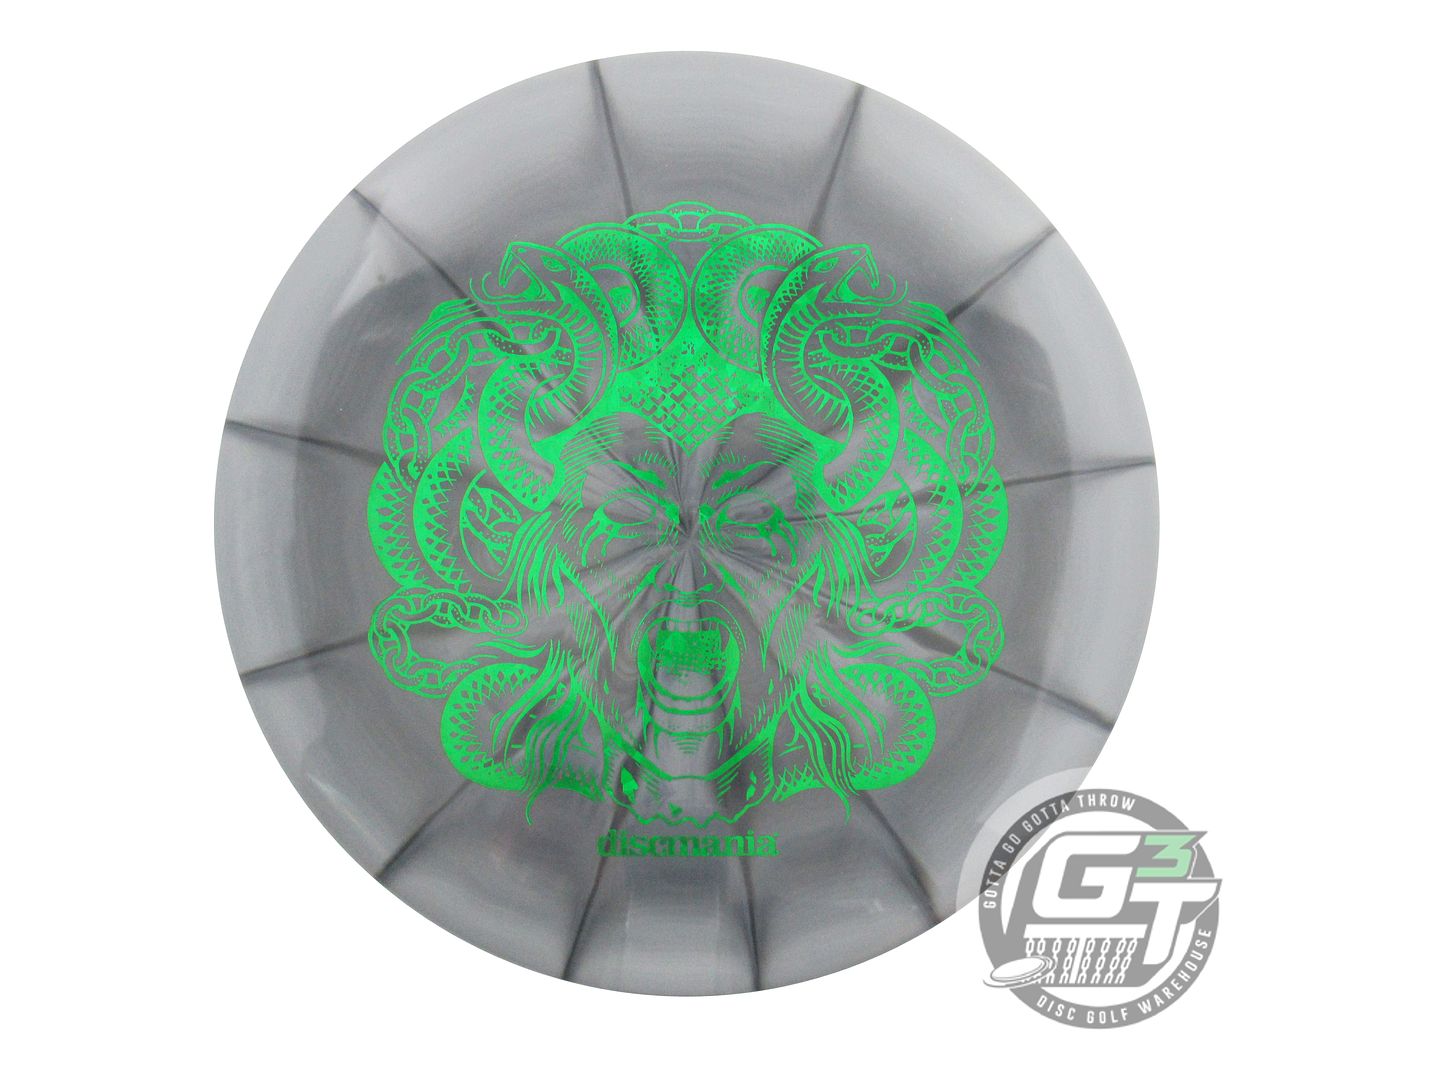 Discmania Limited Edition 2023 Halloween Medusa Stamp Lux Vapor Link Putter Golf Disc (Individually Listed)